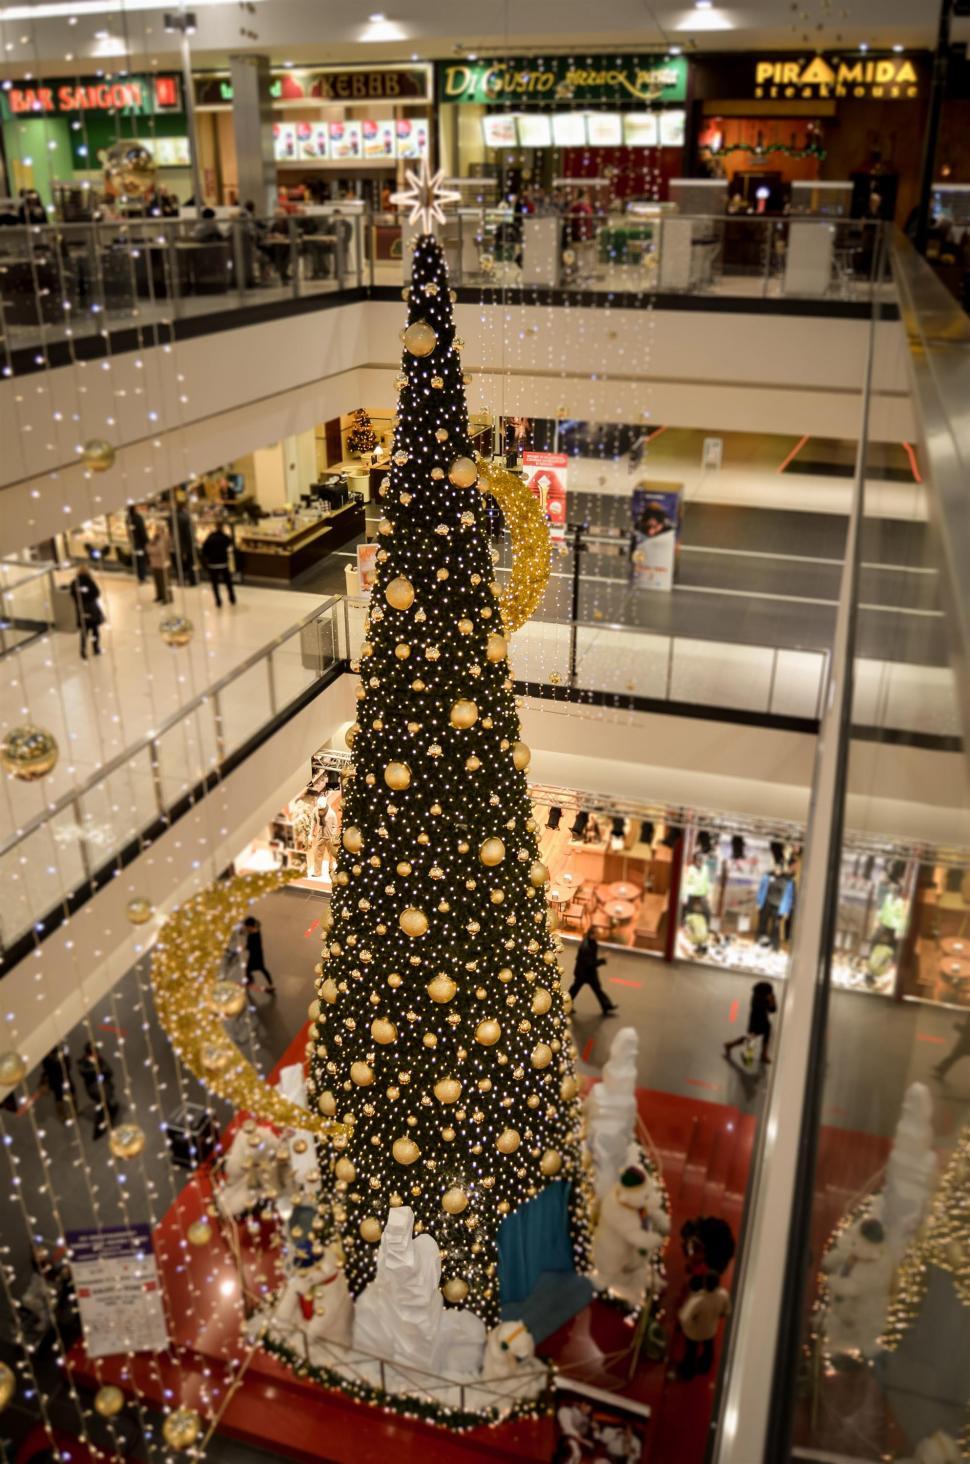 Free Image of Large Christmas Tree in Shopping Mall 